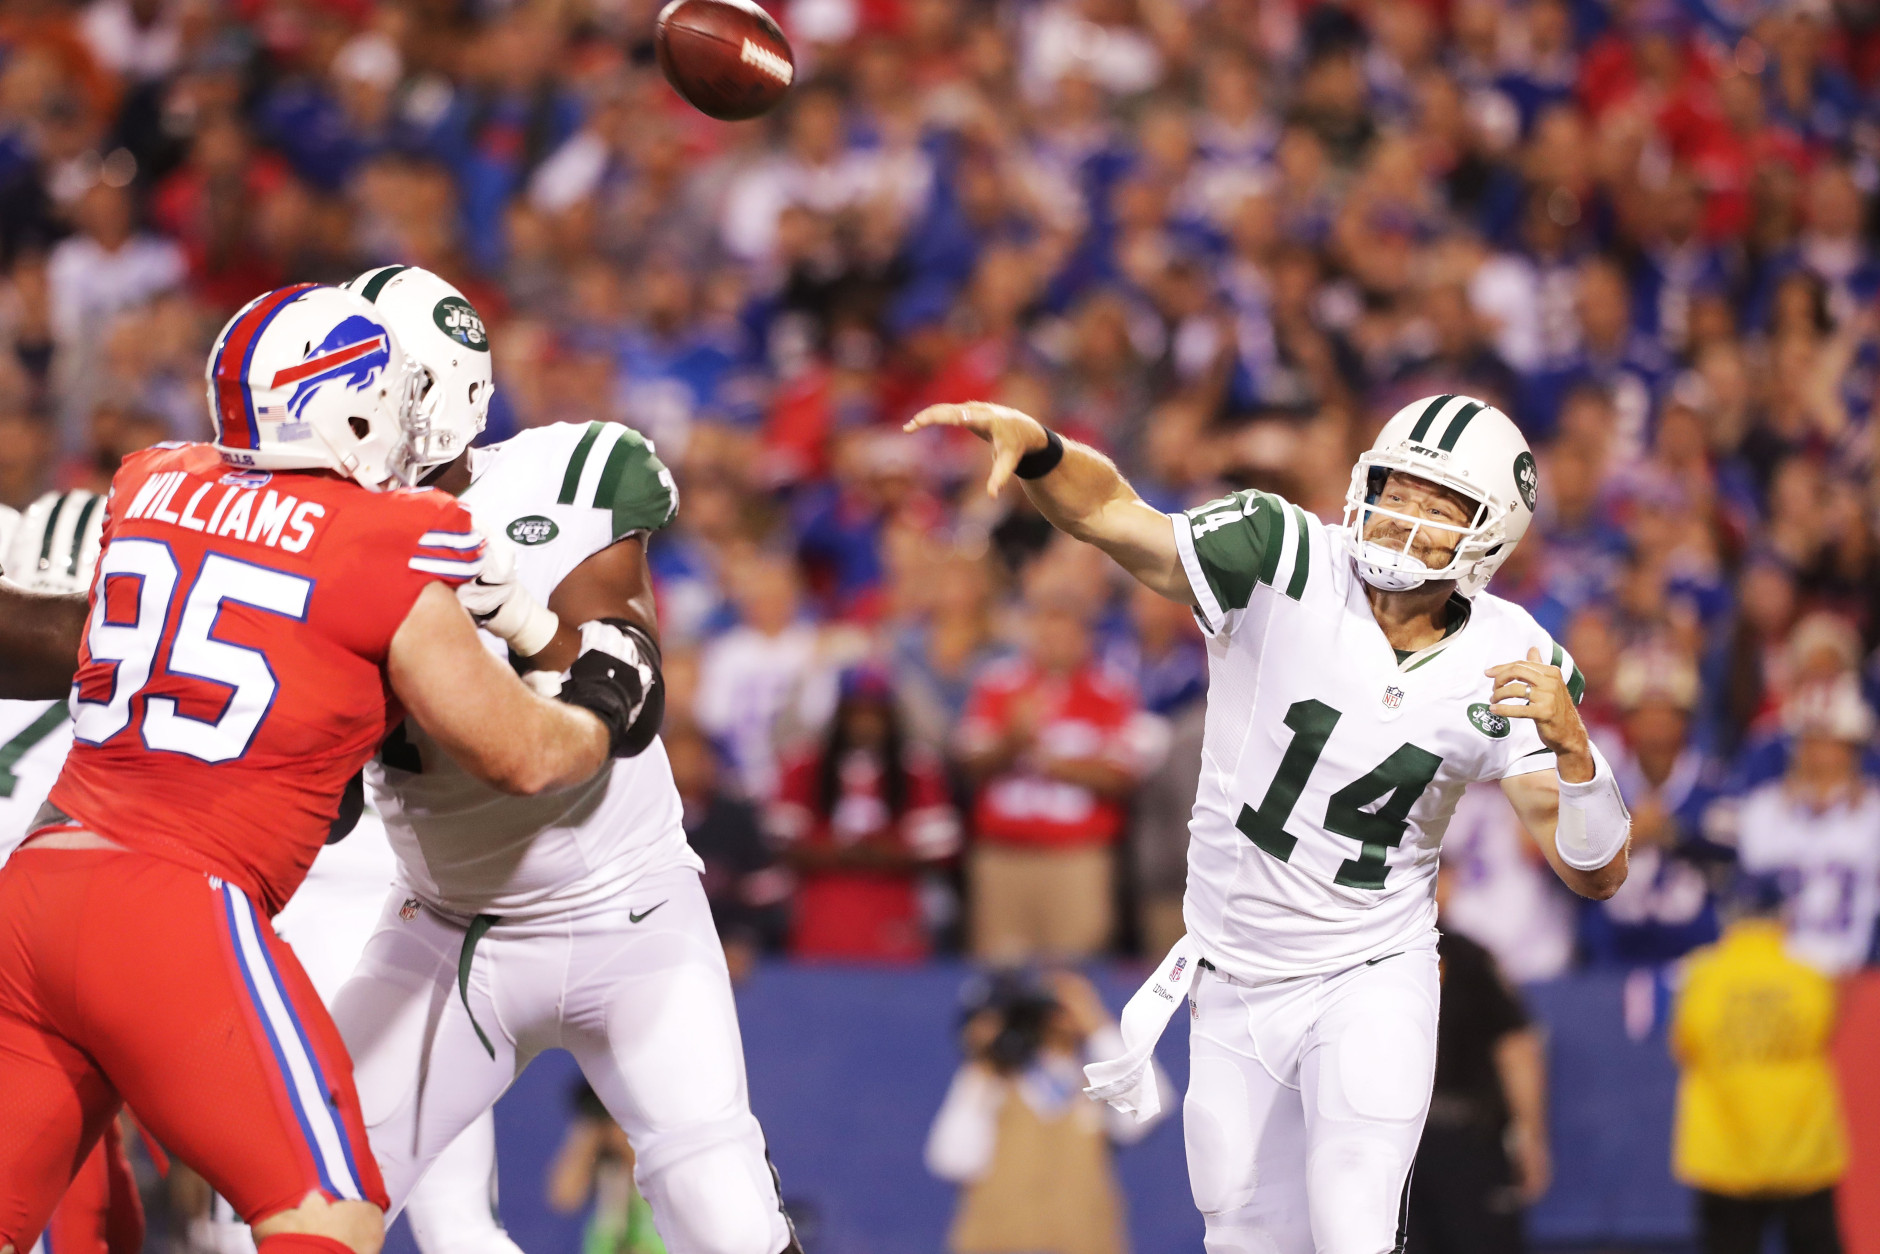 ORCHARD PARK, NY - SEPTEMBER 15:  Ryan Fitzpatrick #14 of the New York Jets throws a pass against the Buffalo Bills during the first half at New Era Field on September 15, 2016 in Orchard Park, New York.  (Photo by Brett Carlsen/Getty Images)